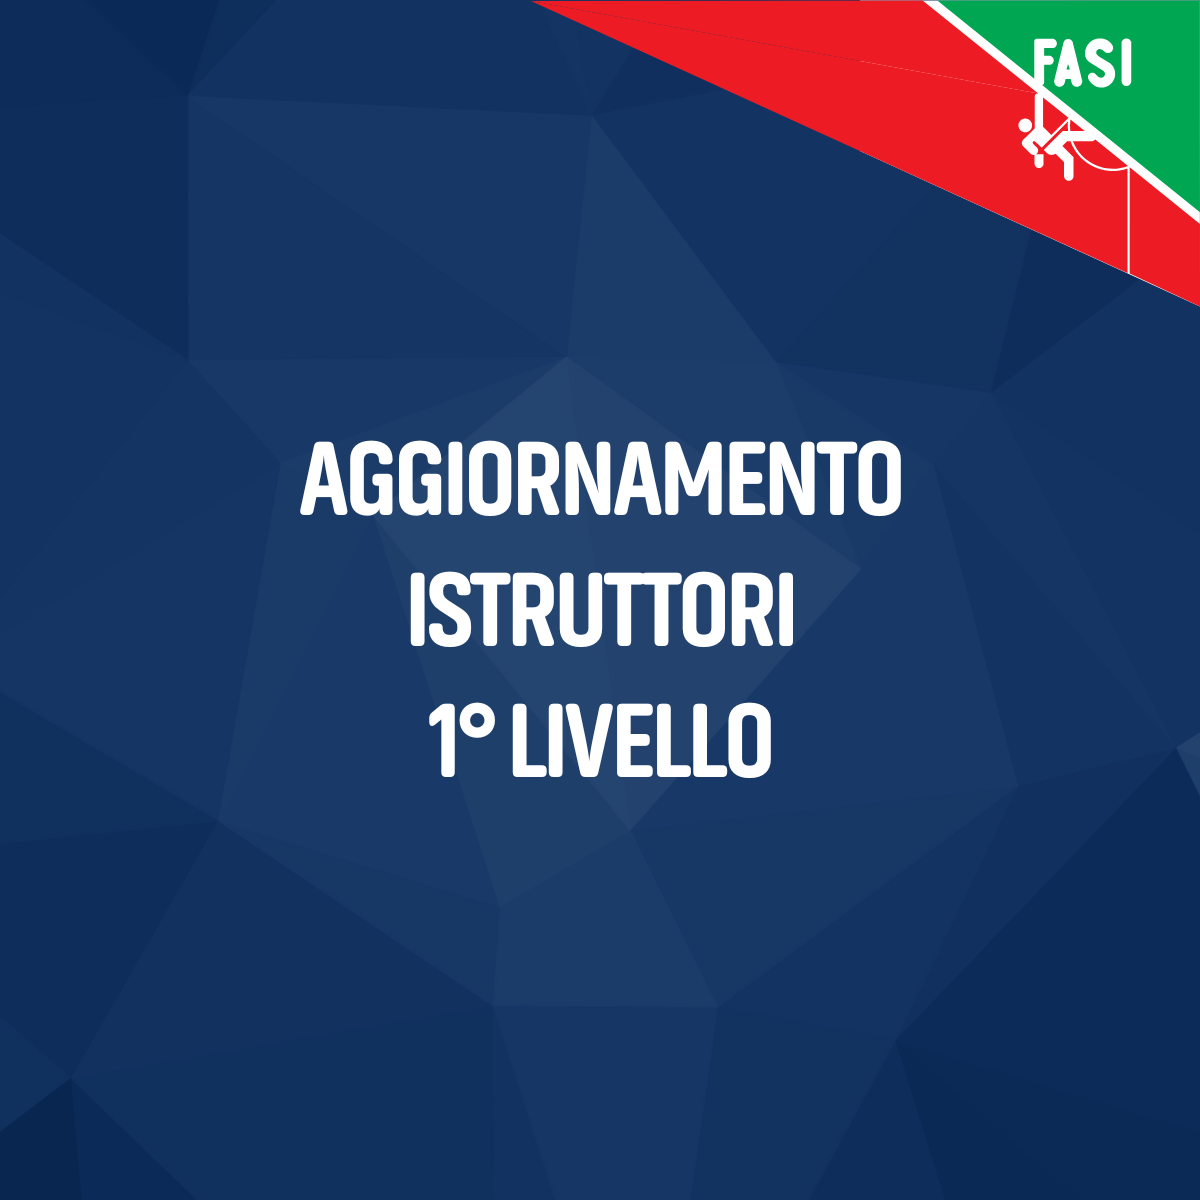 images/news_agg_1_livello.png